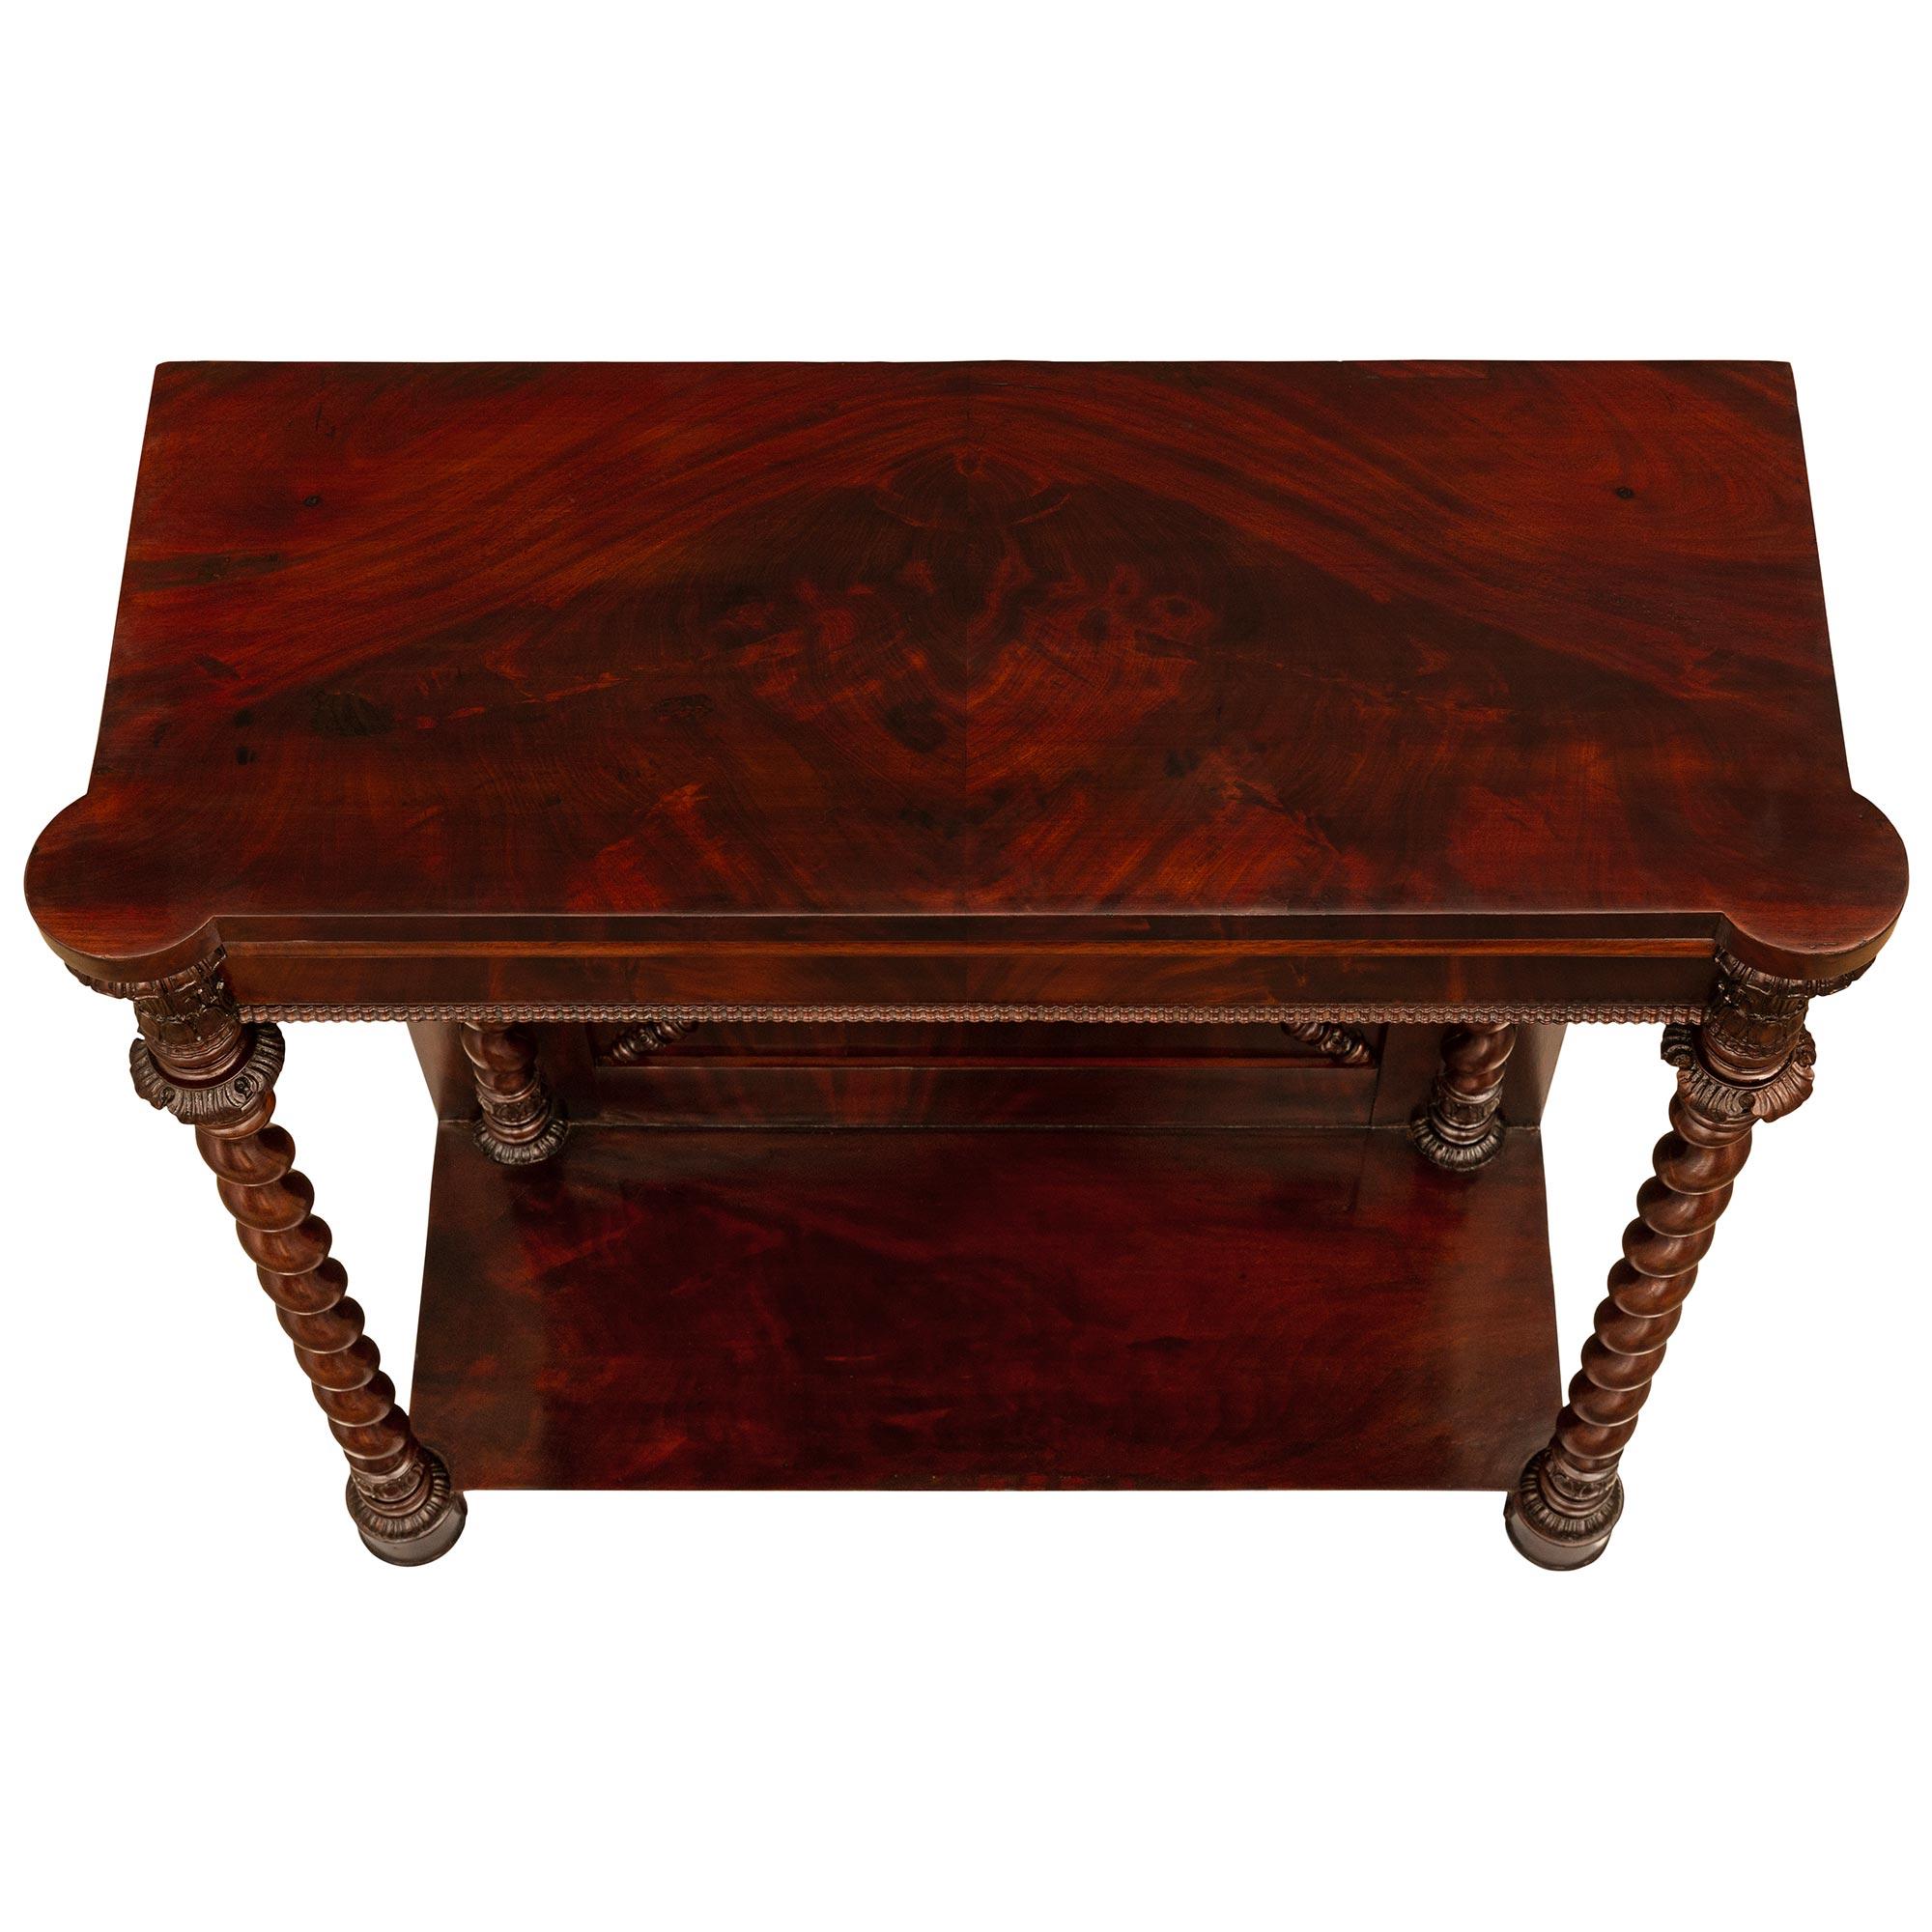 A stunning and high quality French 19th century Louis Philippe Period flamed Mahogany console. The solid Mahogany freestanding console is raised on lovely circular mottled feet joined by a Mahogany display tier below exceptional and most decorative